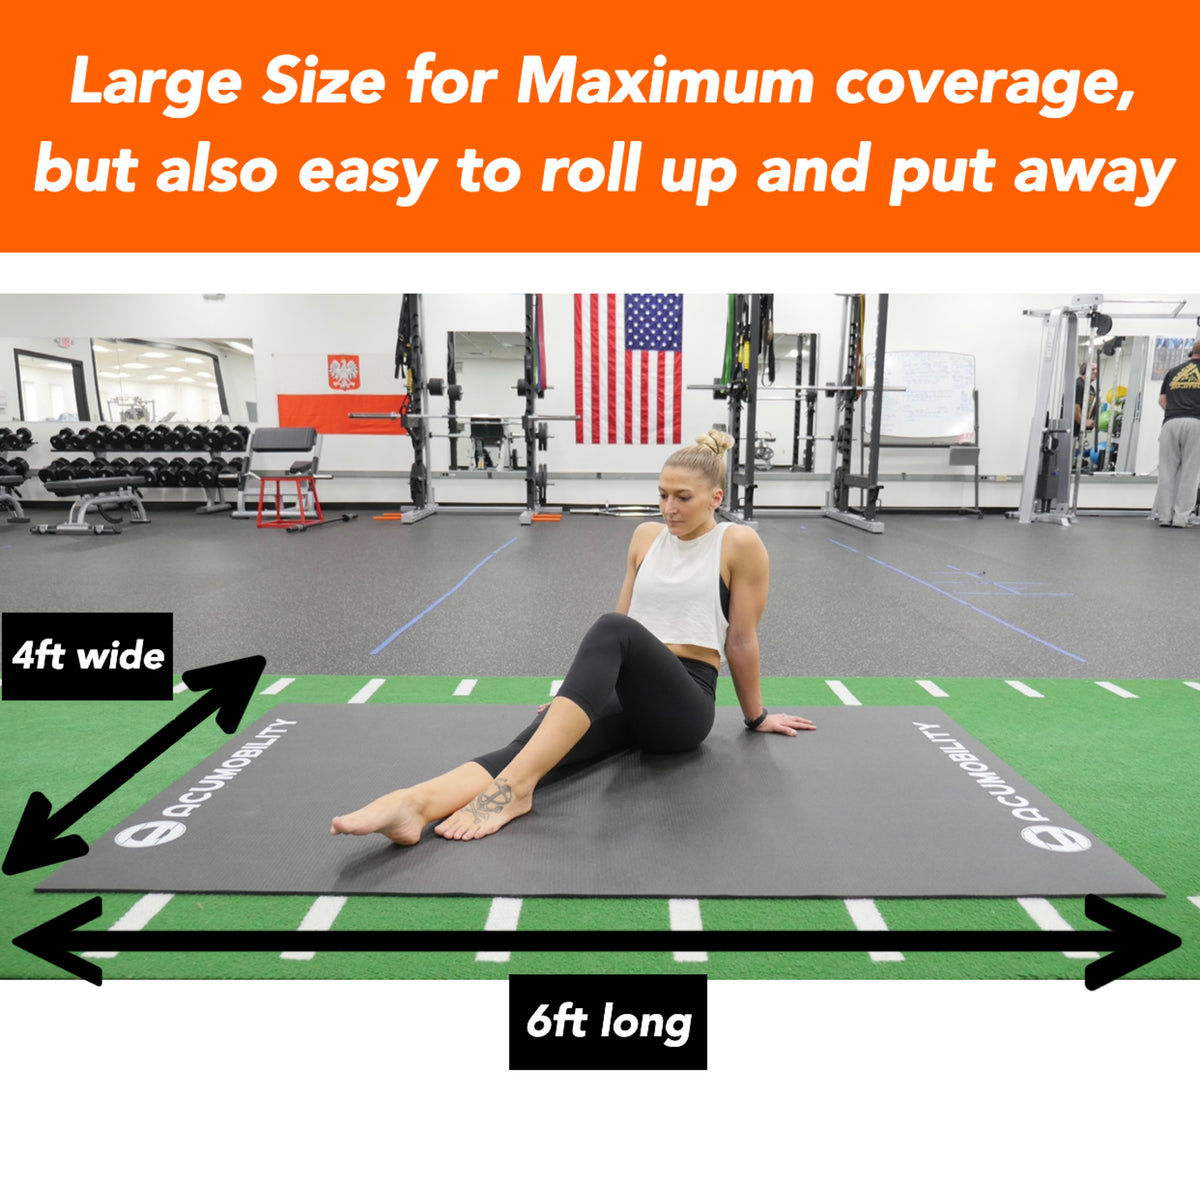 Acumobility Exercise & Mobility Mat